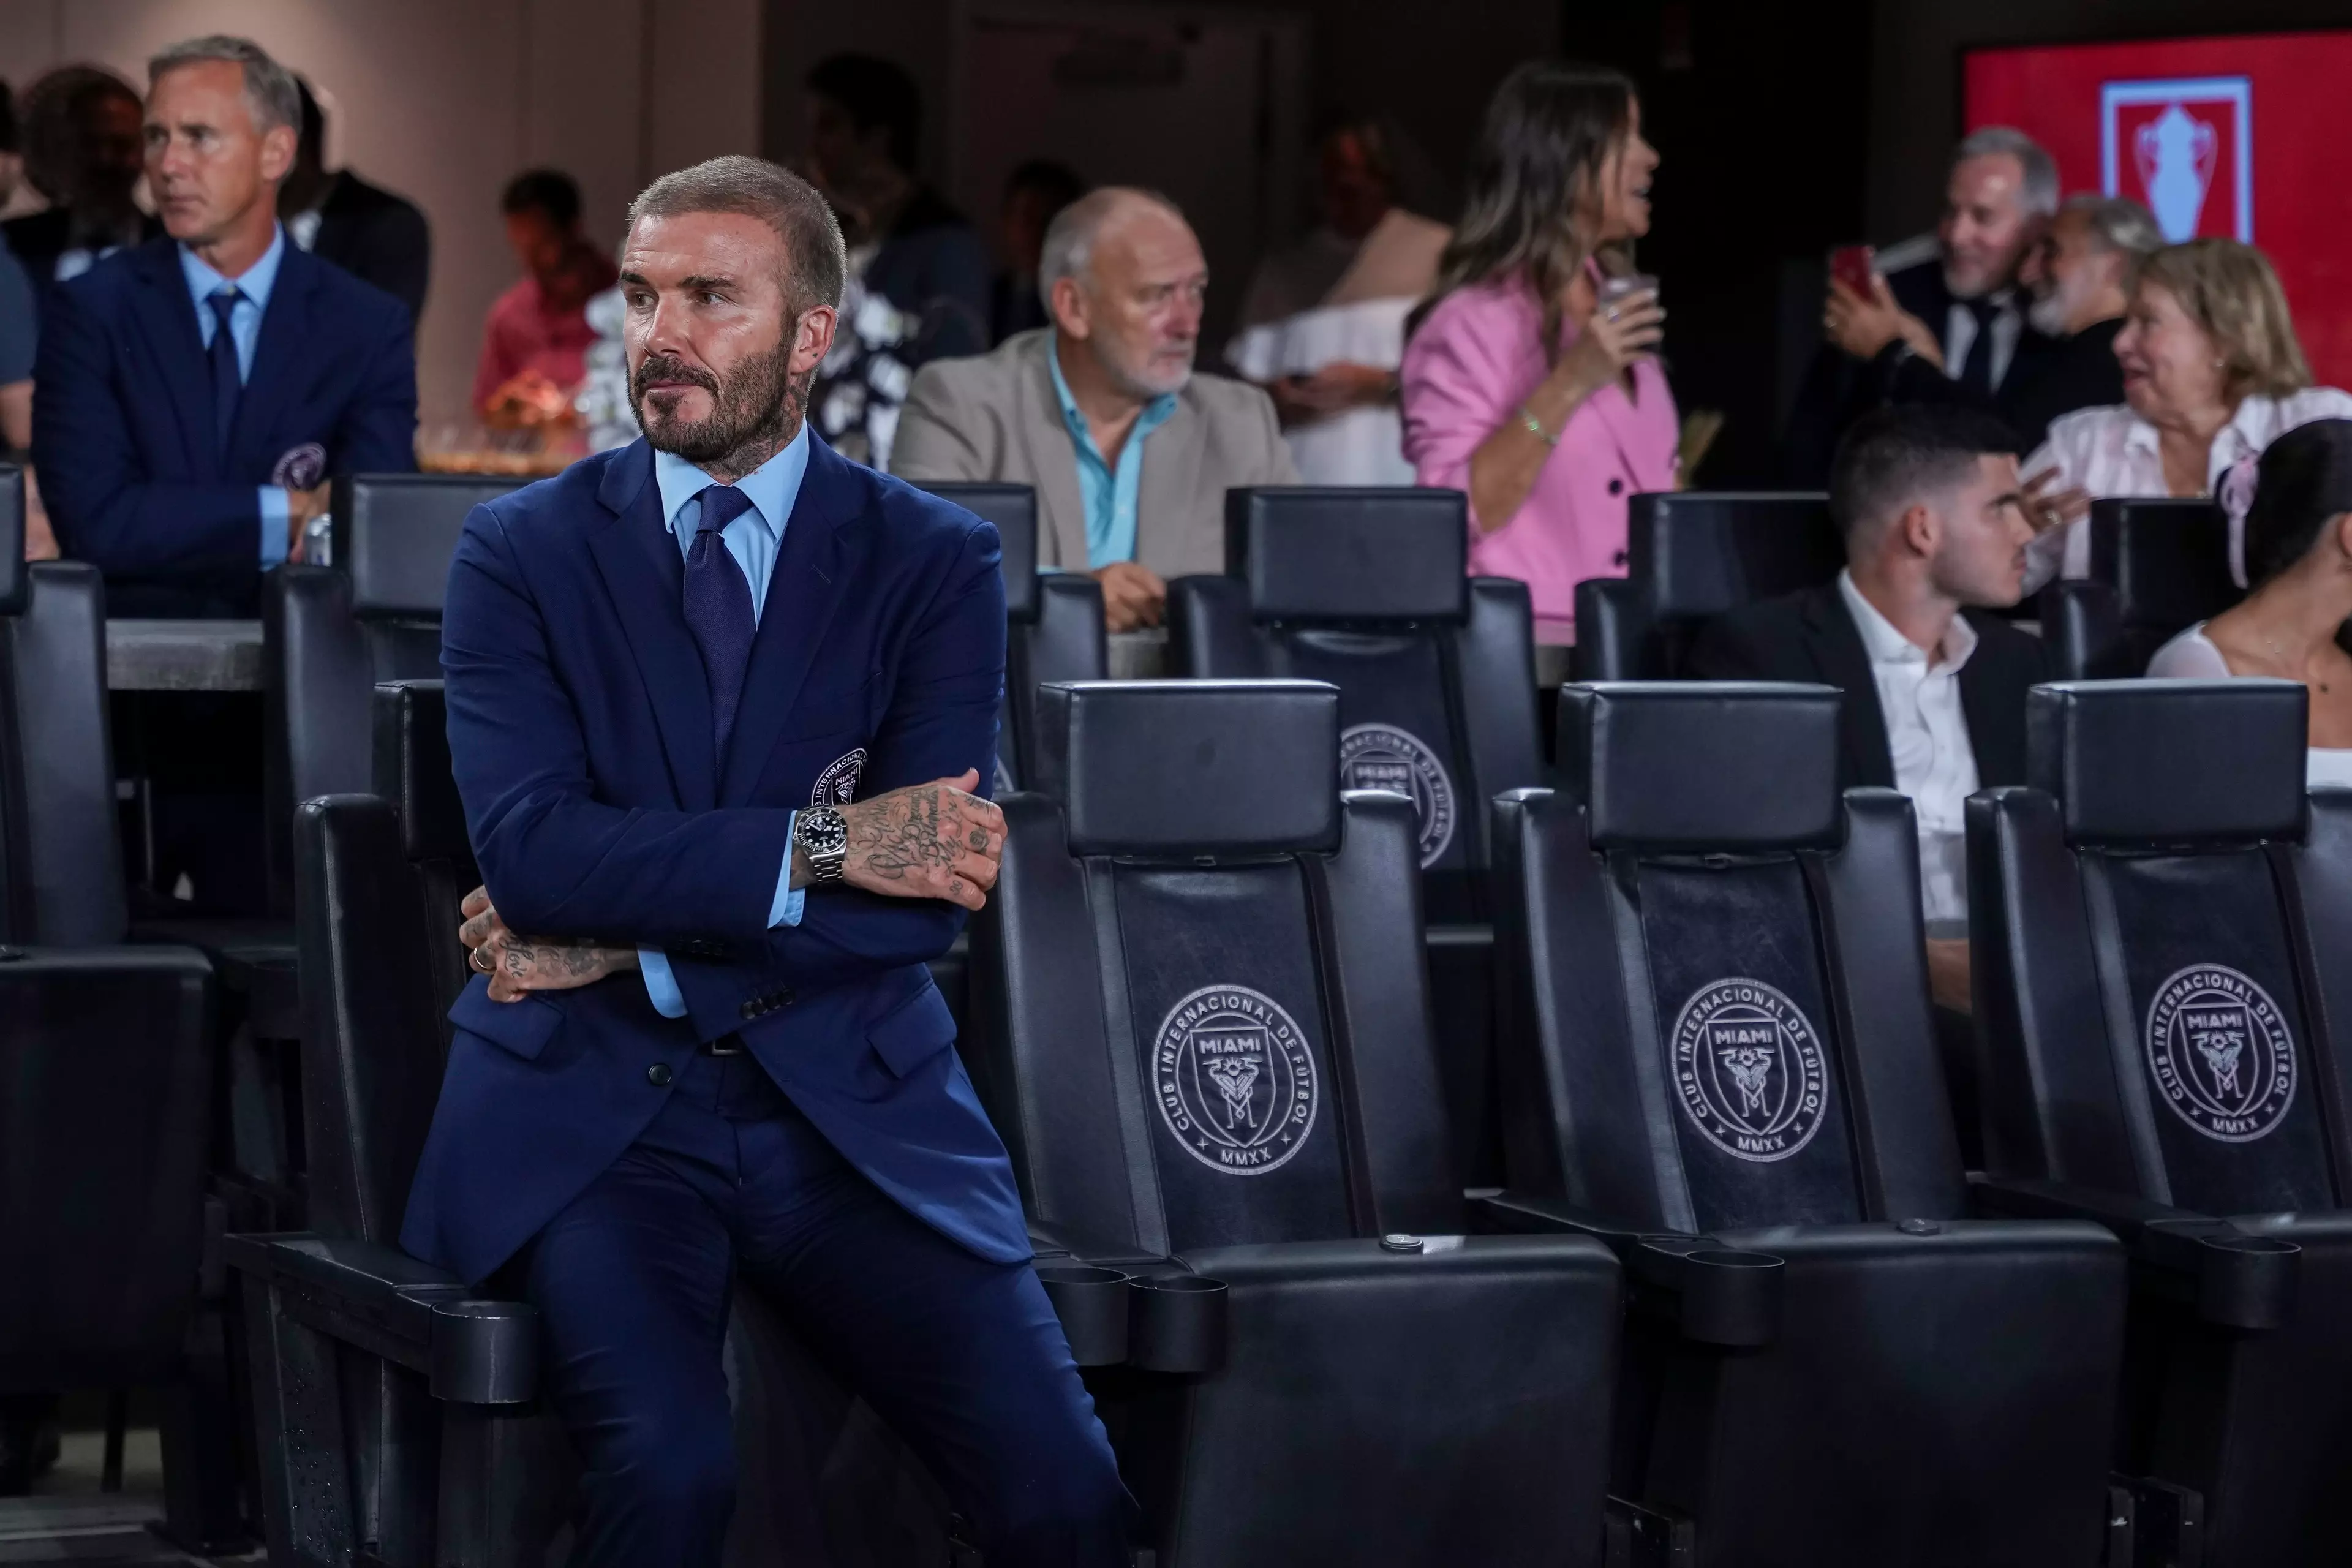 Beckham founded Inter Miami in 2018. (Image